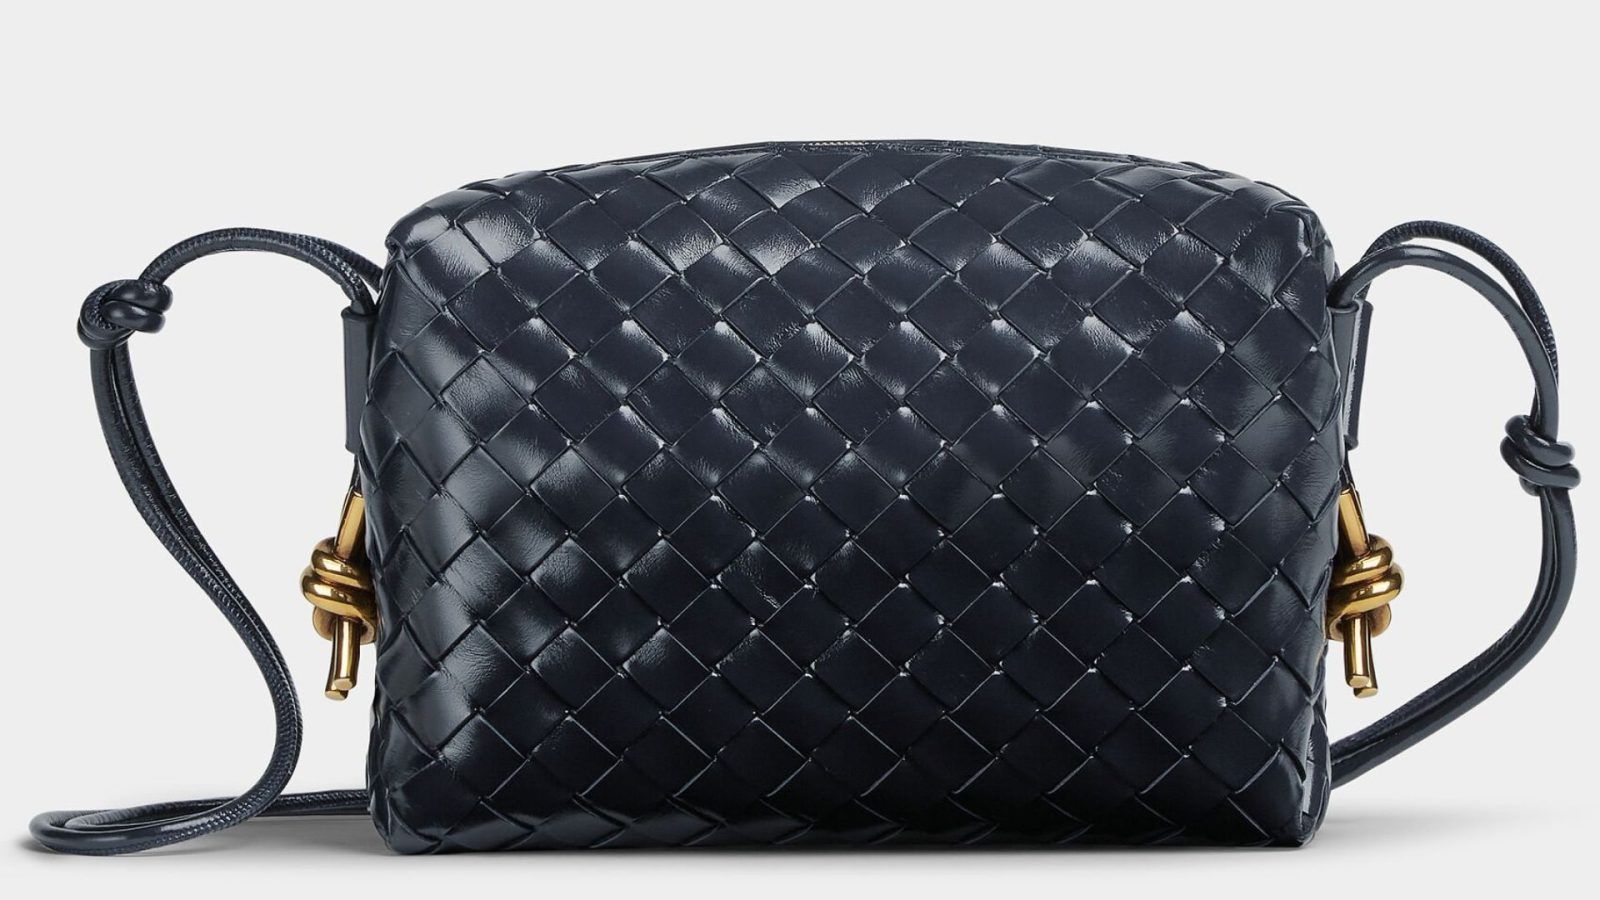 Bottega Veneta's next sustainable step is a bag collection made of